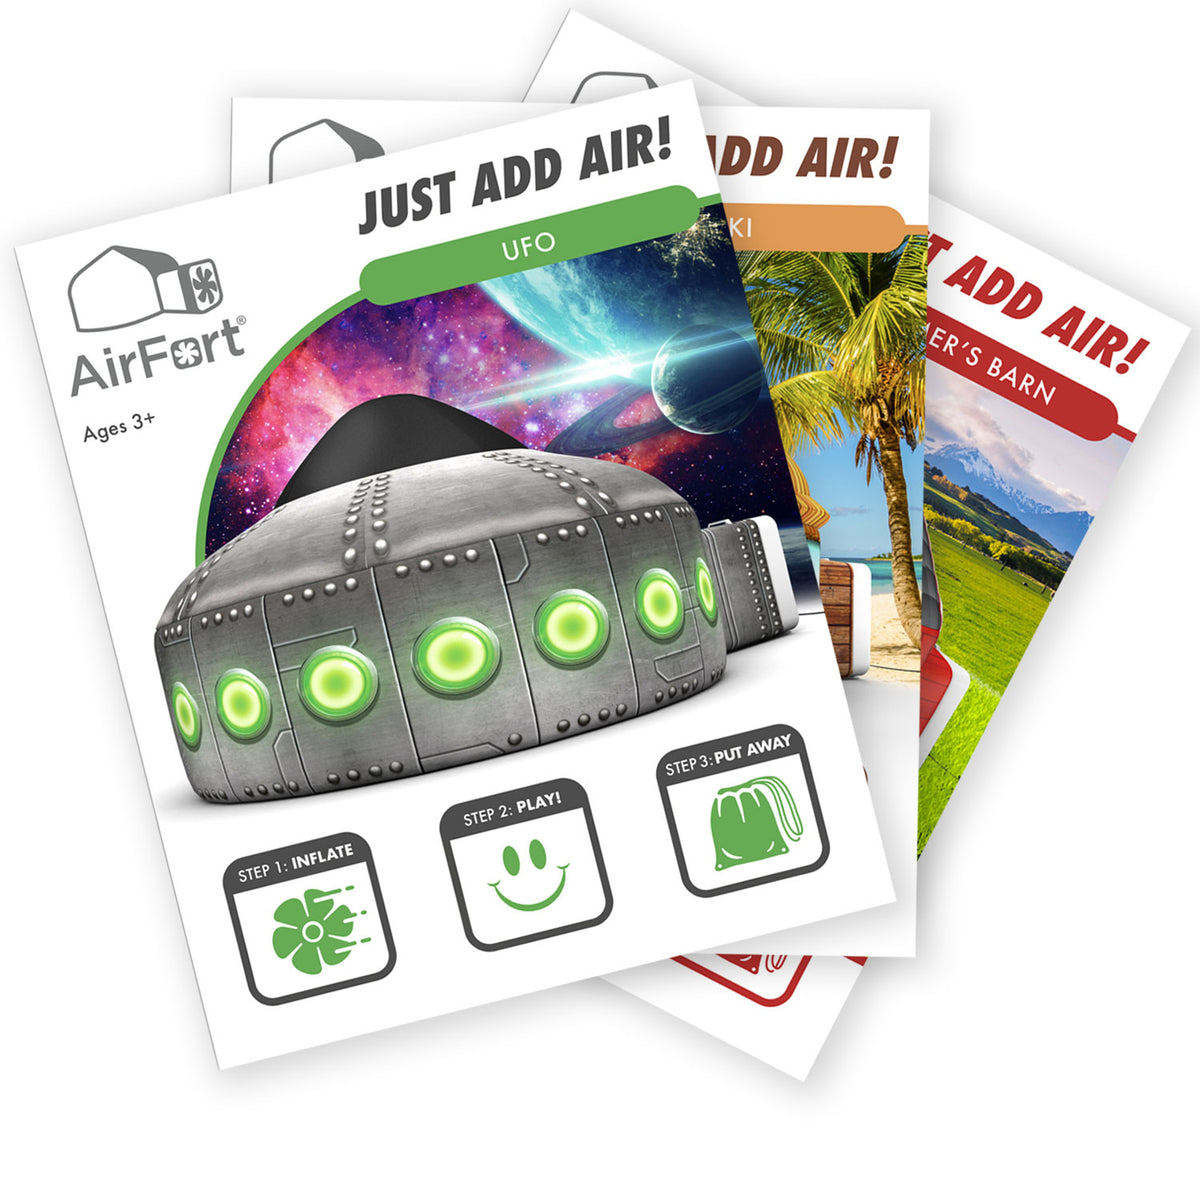 AirFort in Retail Gift Box